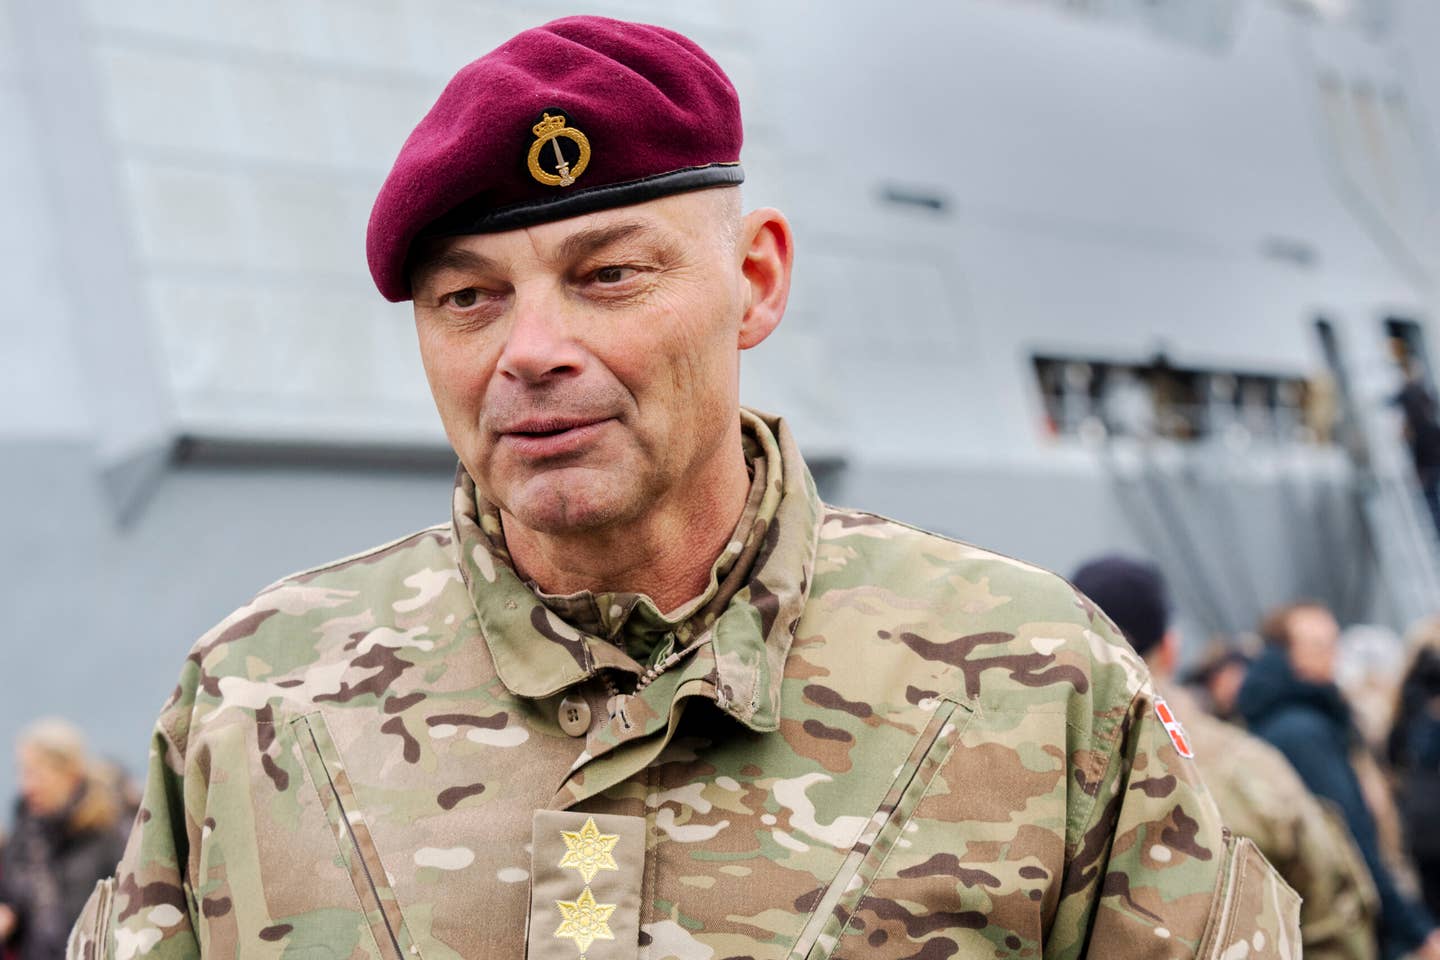 Seen during his time as Commander Special Operations Command Denmark, Maj. Gen. Michael Hyldgaard is now the acting Chief of the Danish Armed Forces. <em>Photo by IDA MARIE ODGAARD/Ritzau Scanpix/AFP via Getty Images</em>